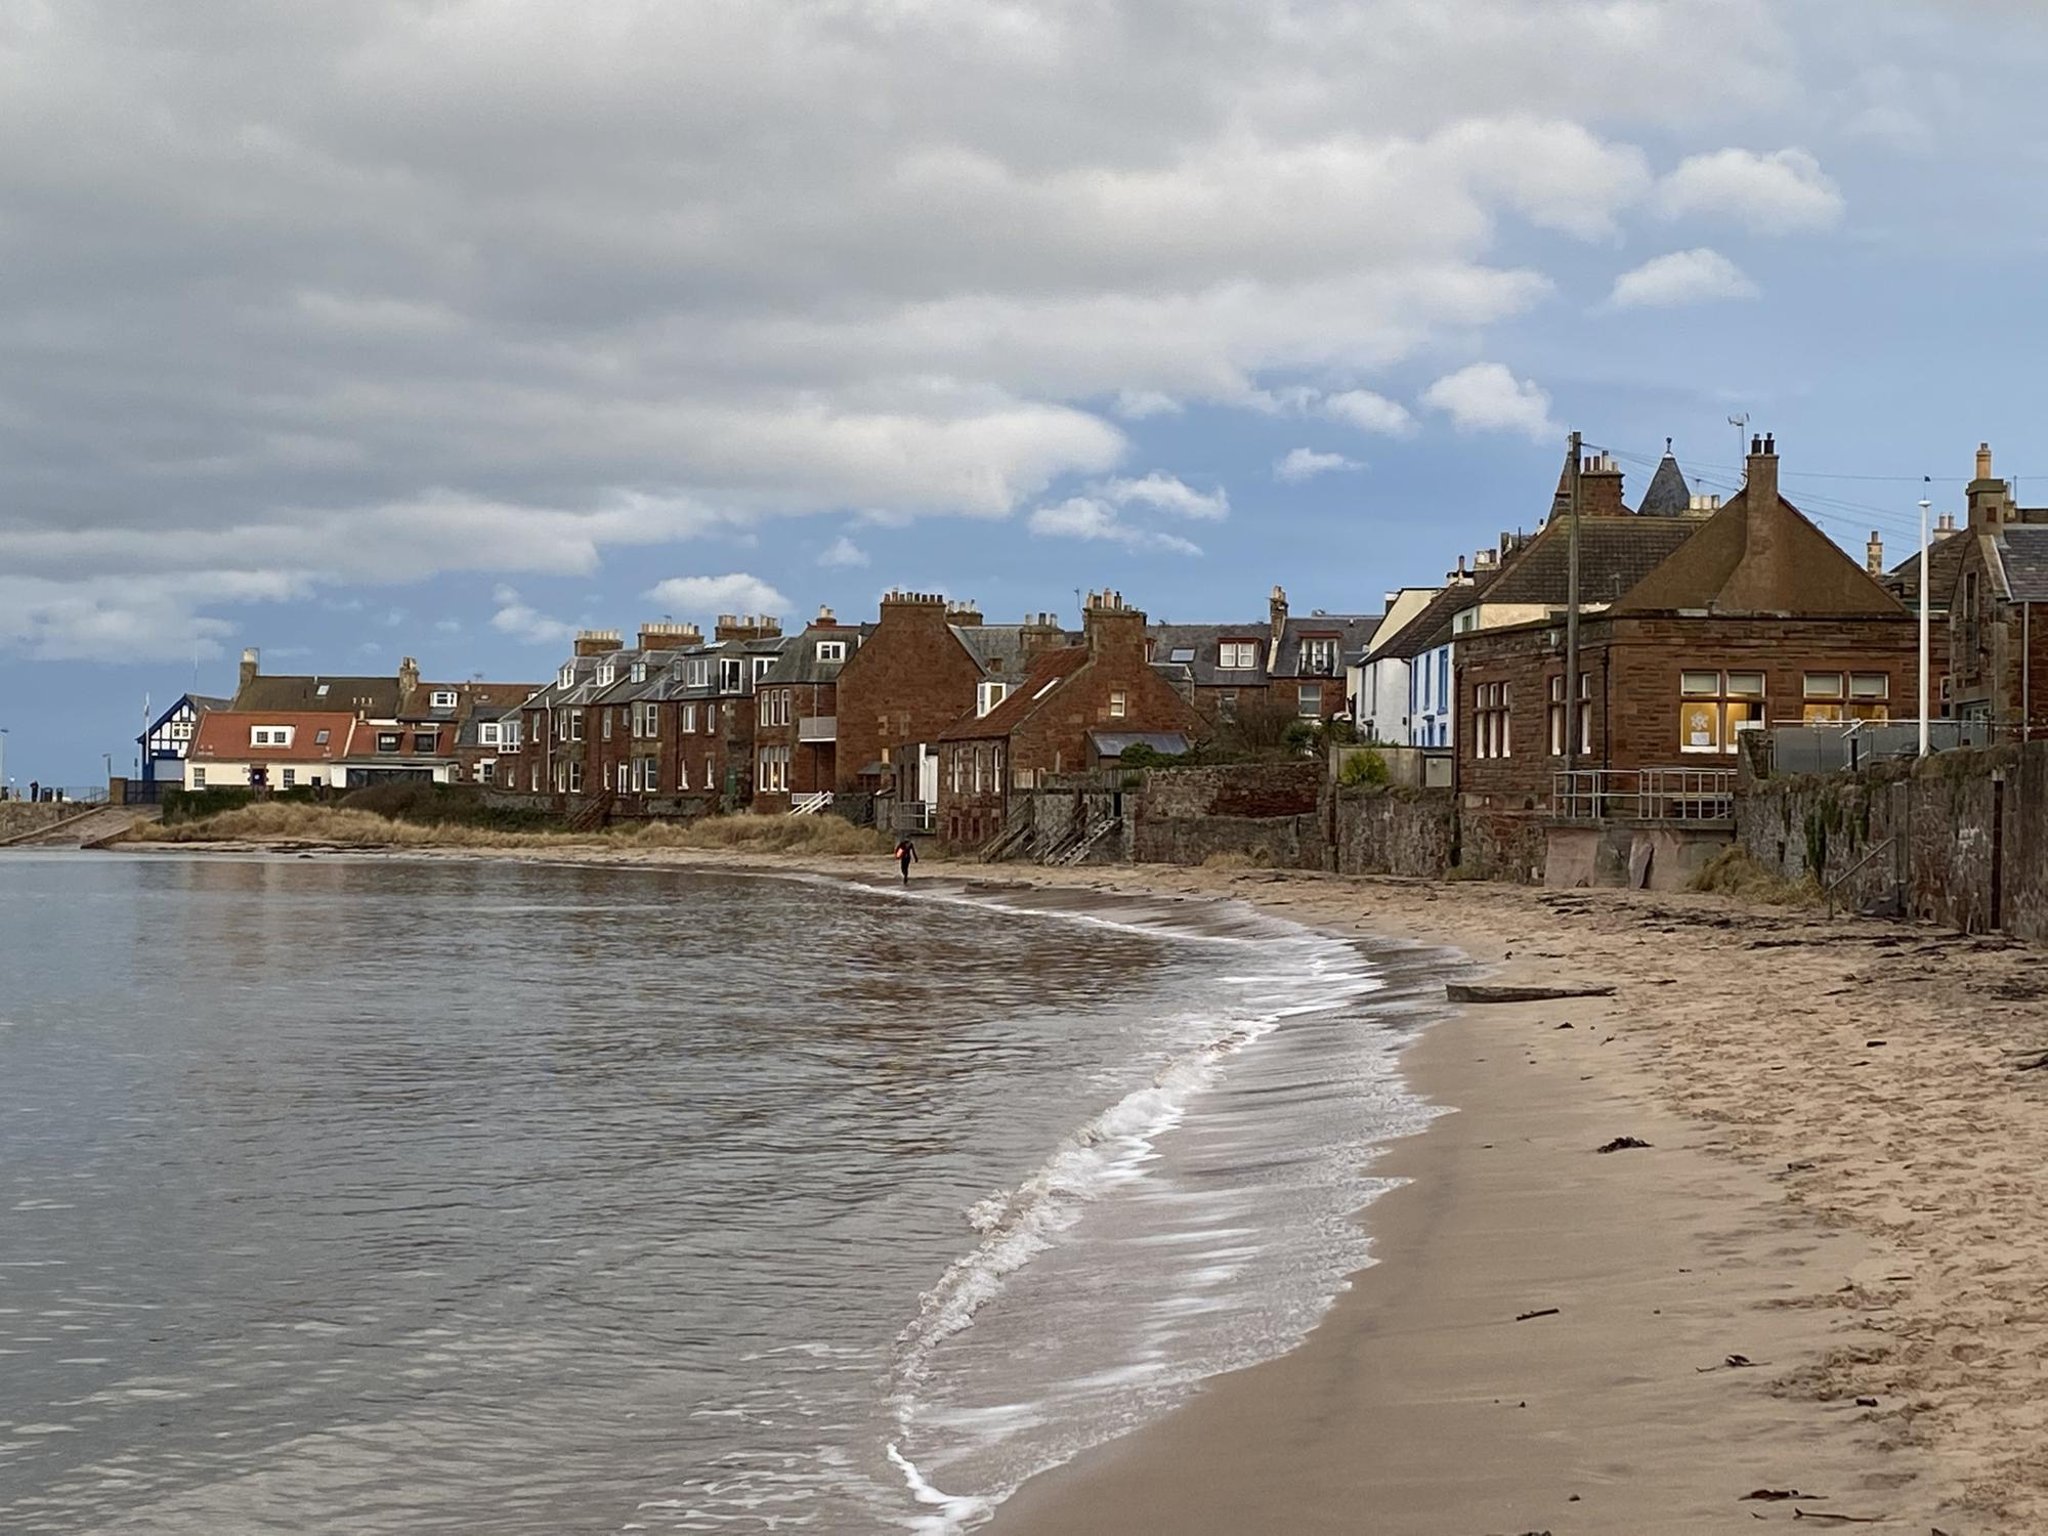 Rescued swimmers were seconds from drowning off North Berwick pier